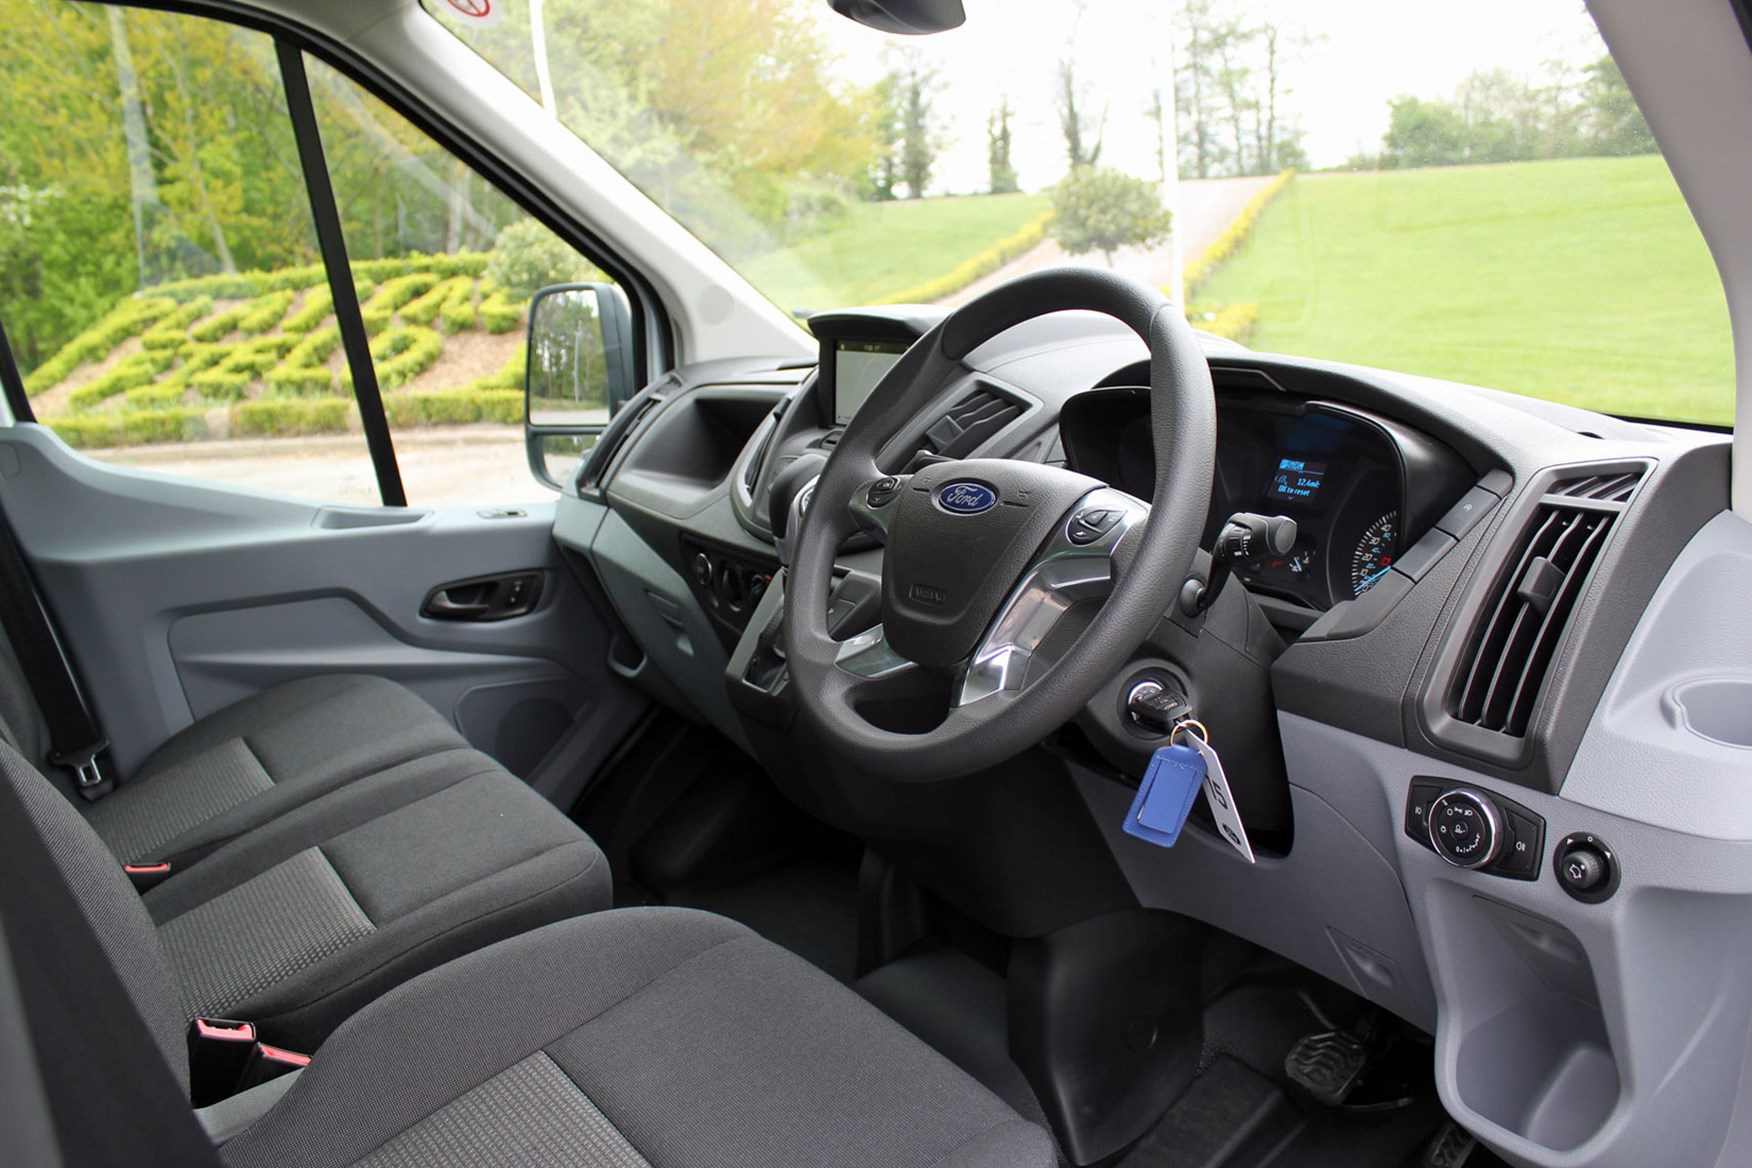 Ford Transit Luton review - steering wheel and cab interior